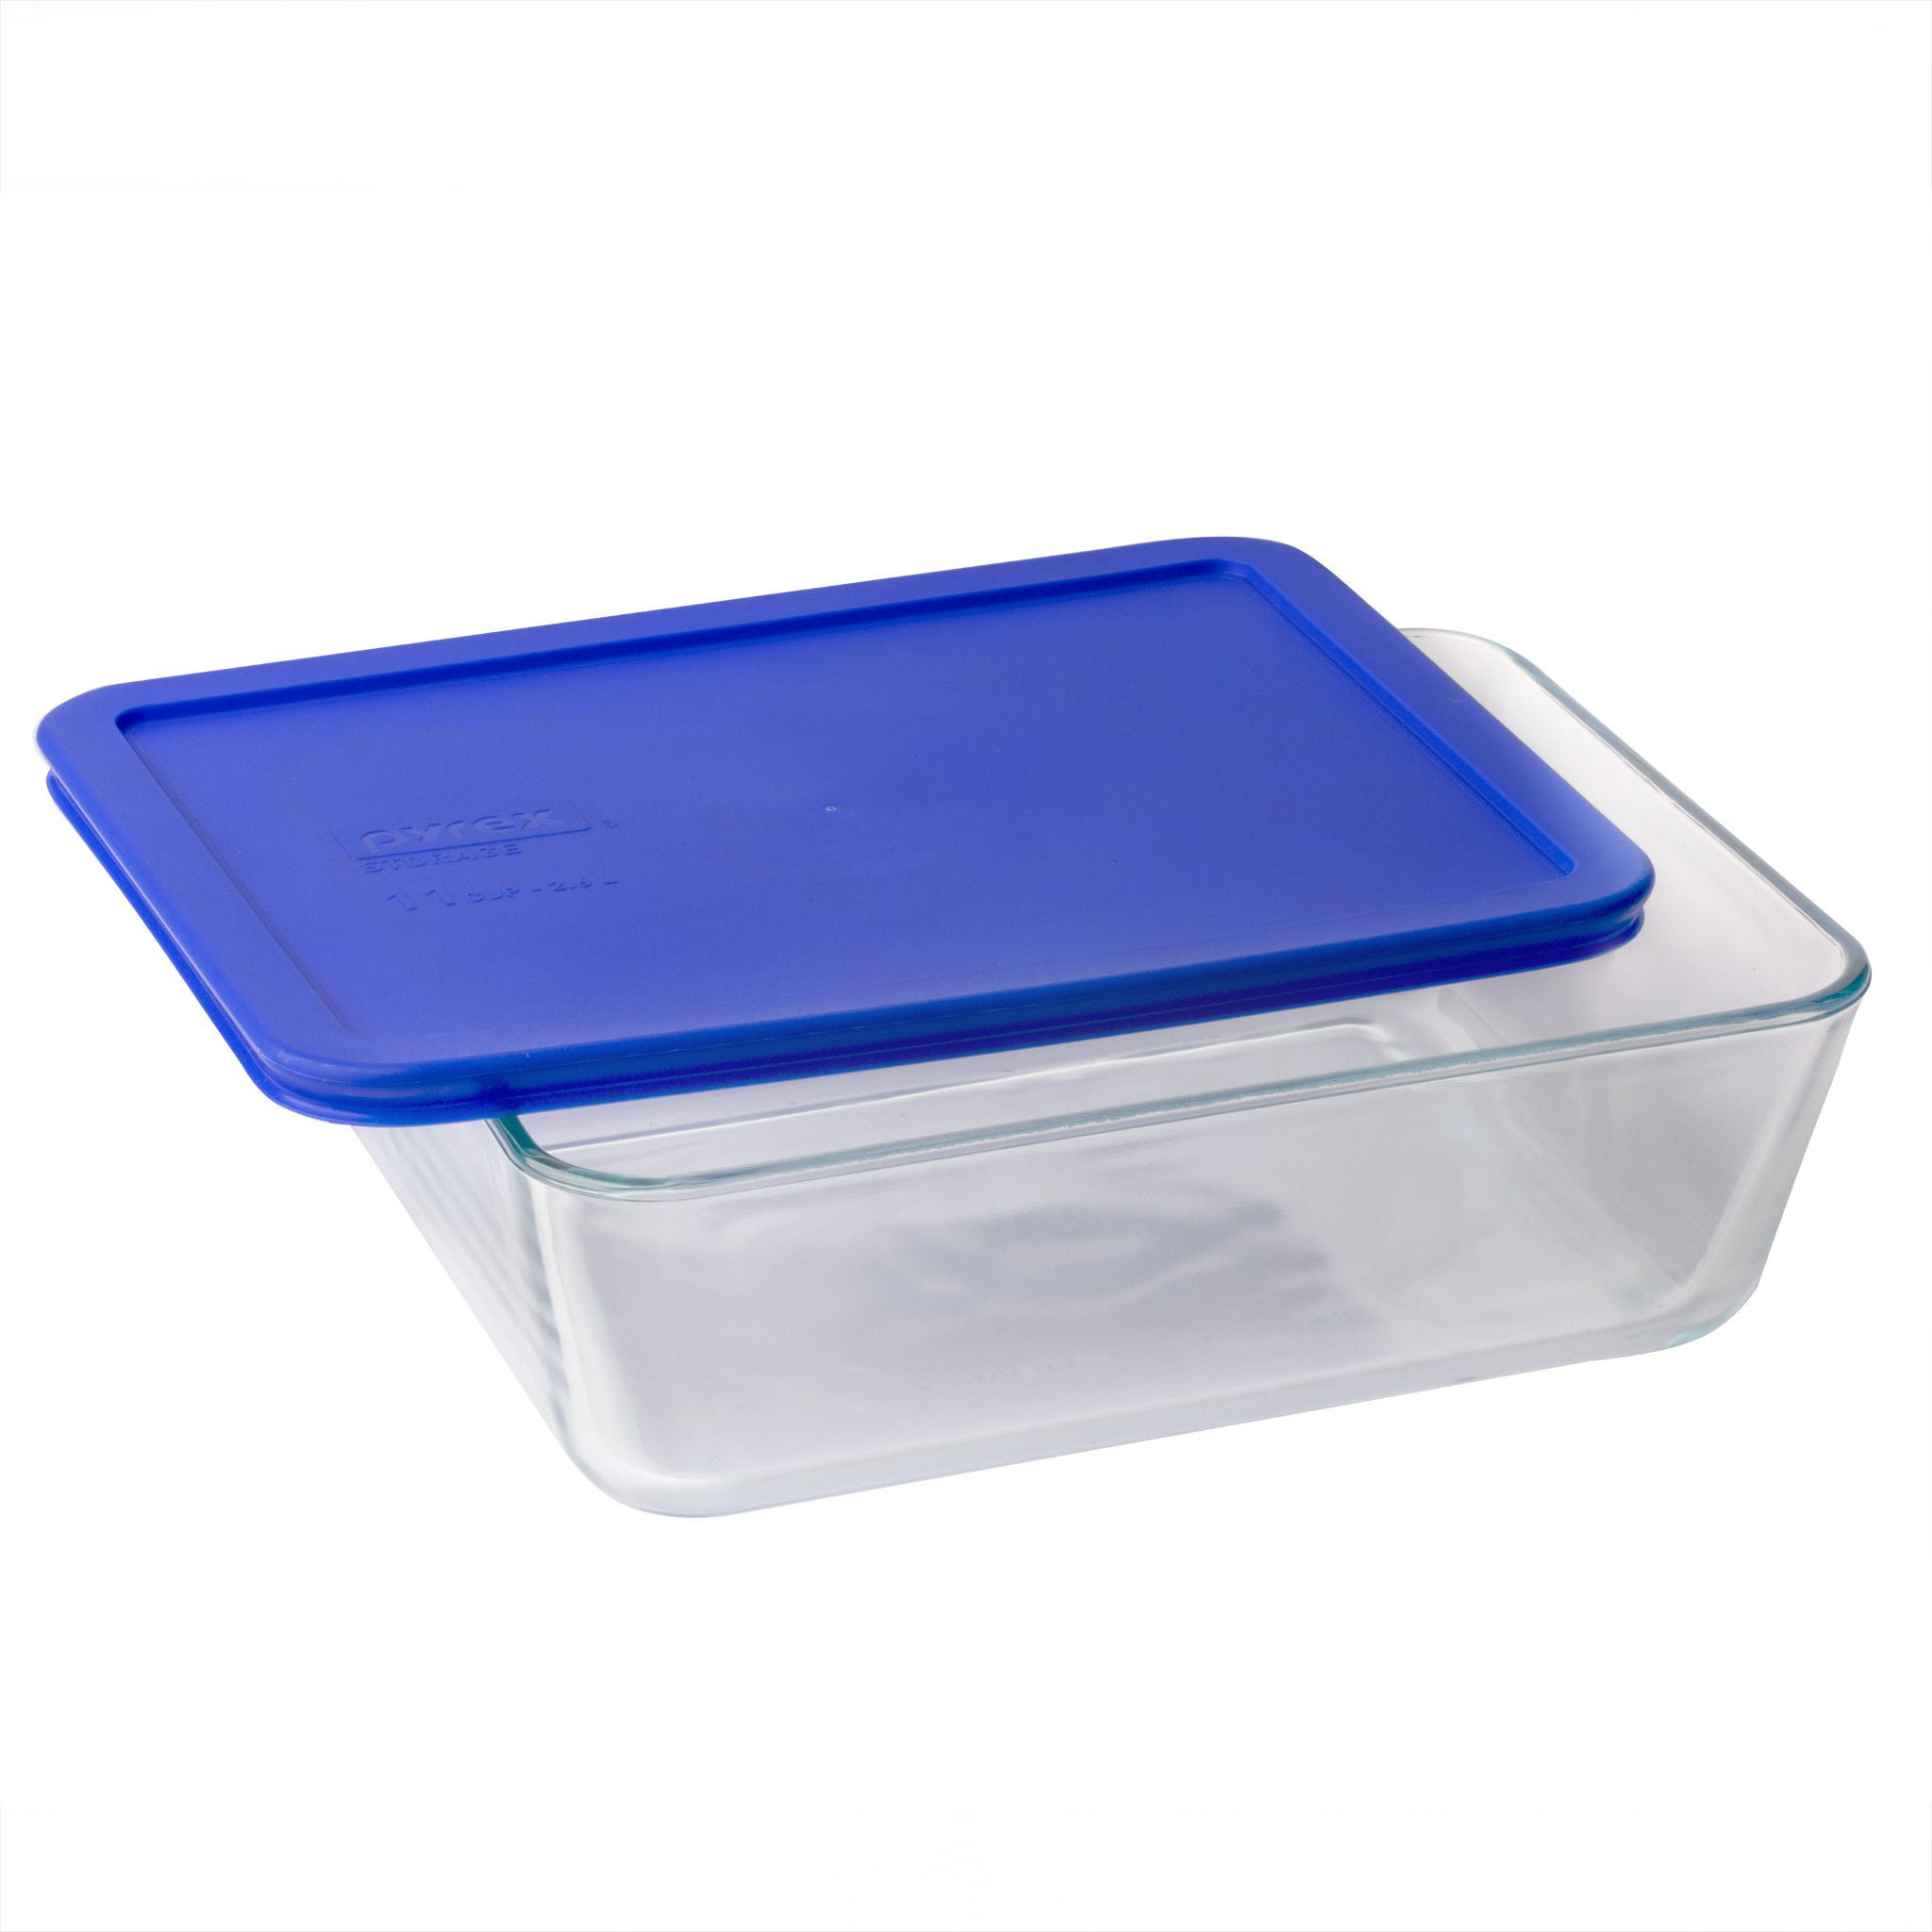 Pyrex Simply Store 11 Cup Glass Storage Dish